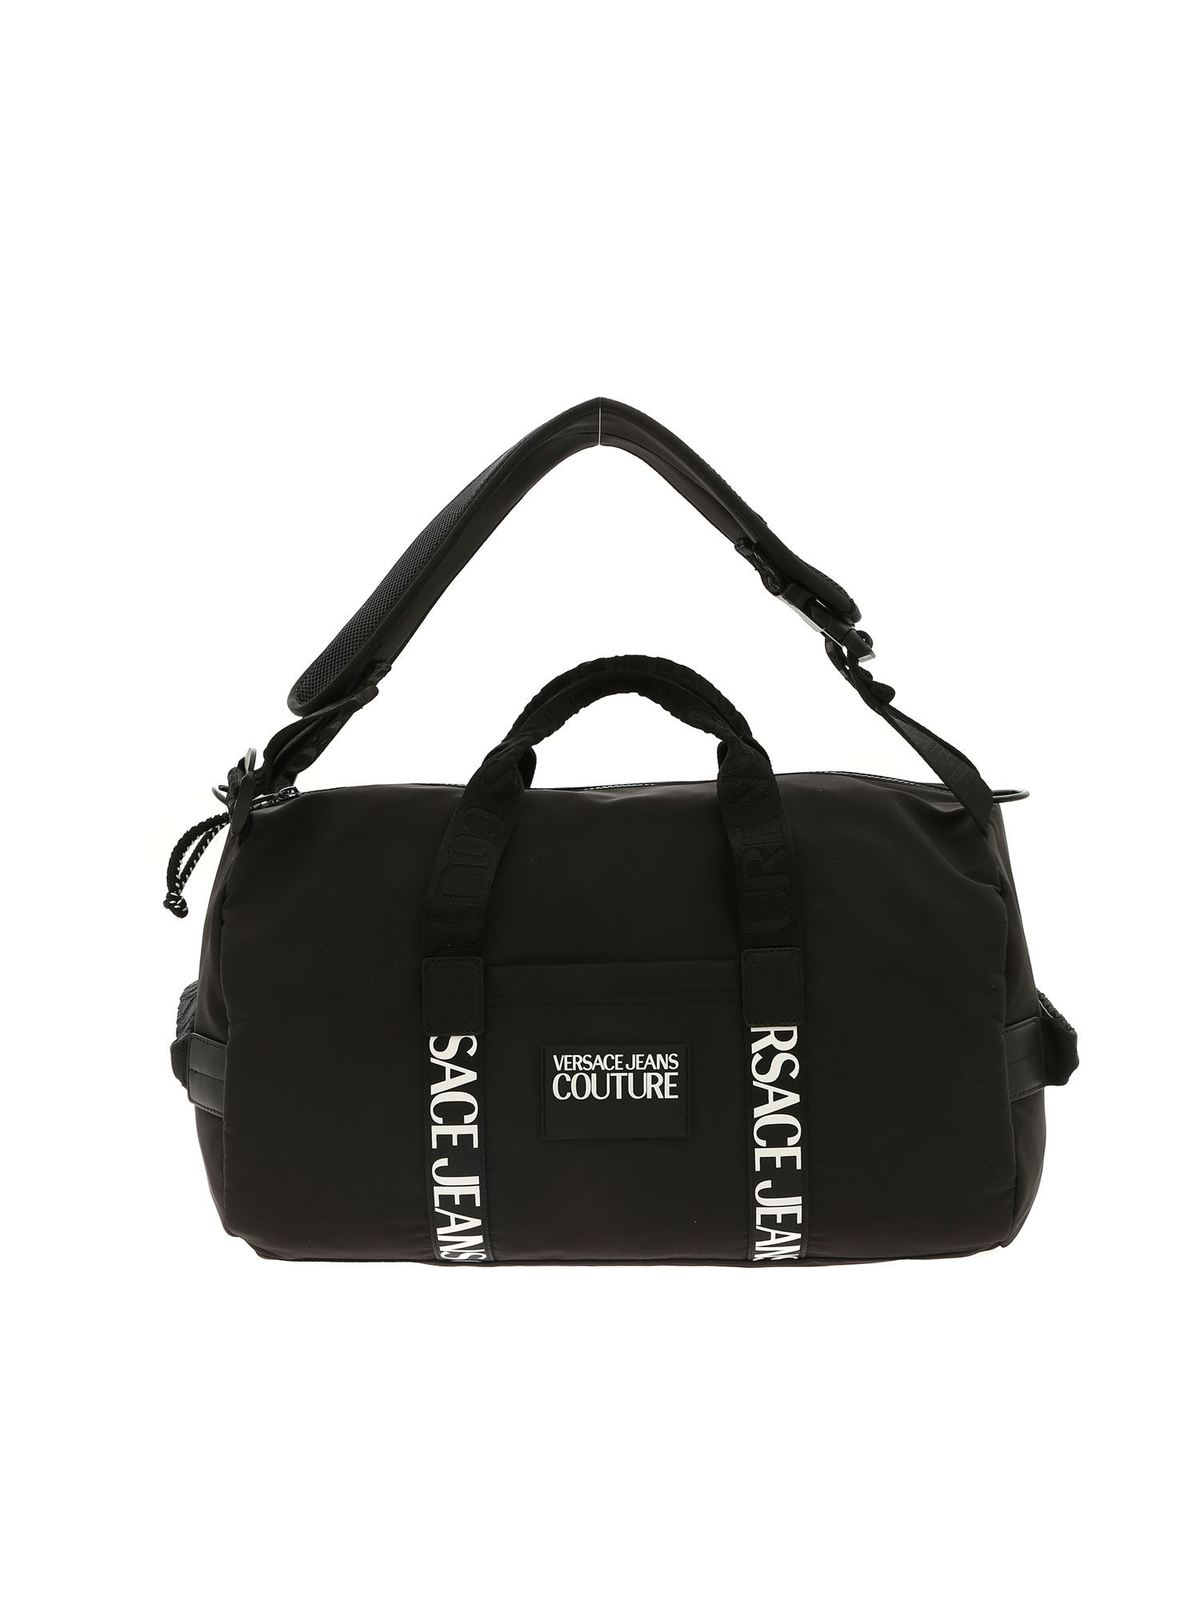 VERSACE JEANS COUTURE RUBBER LOGO TAG DUFFLE BAG IN BLACK